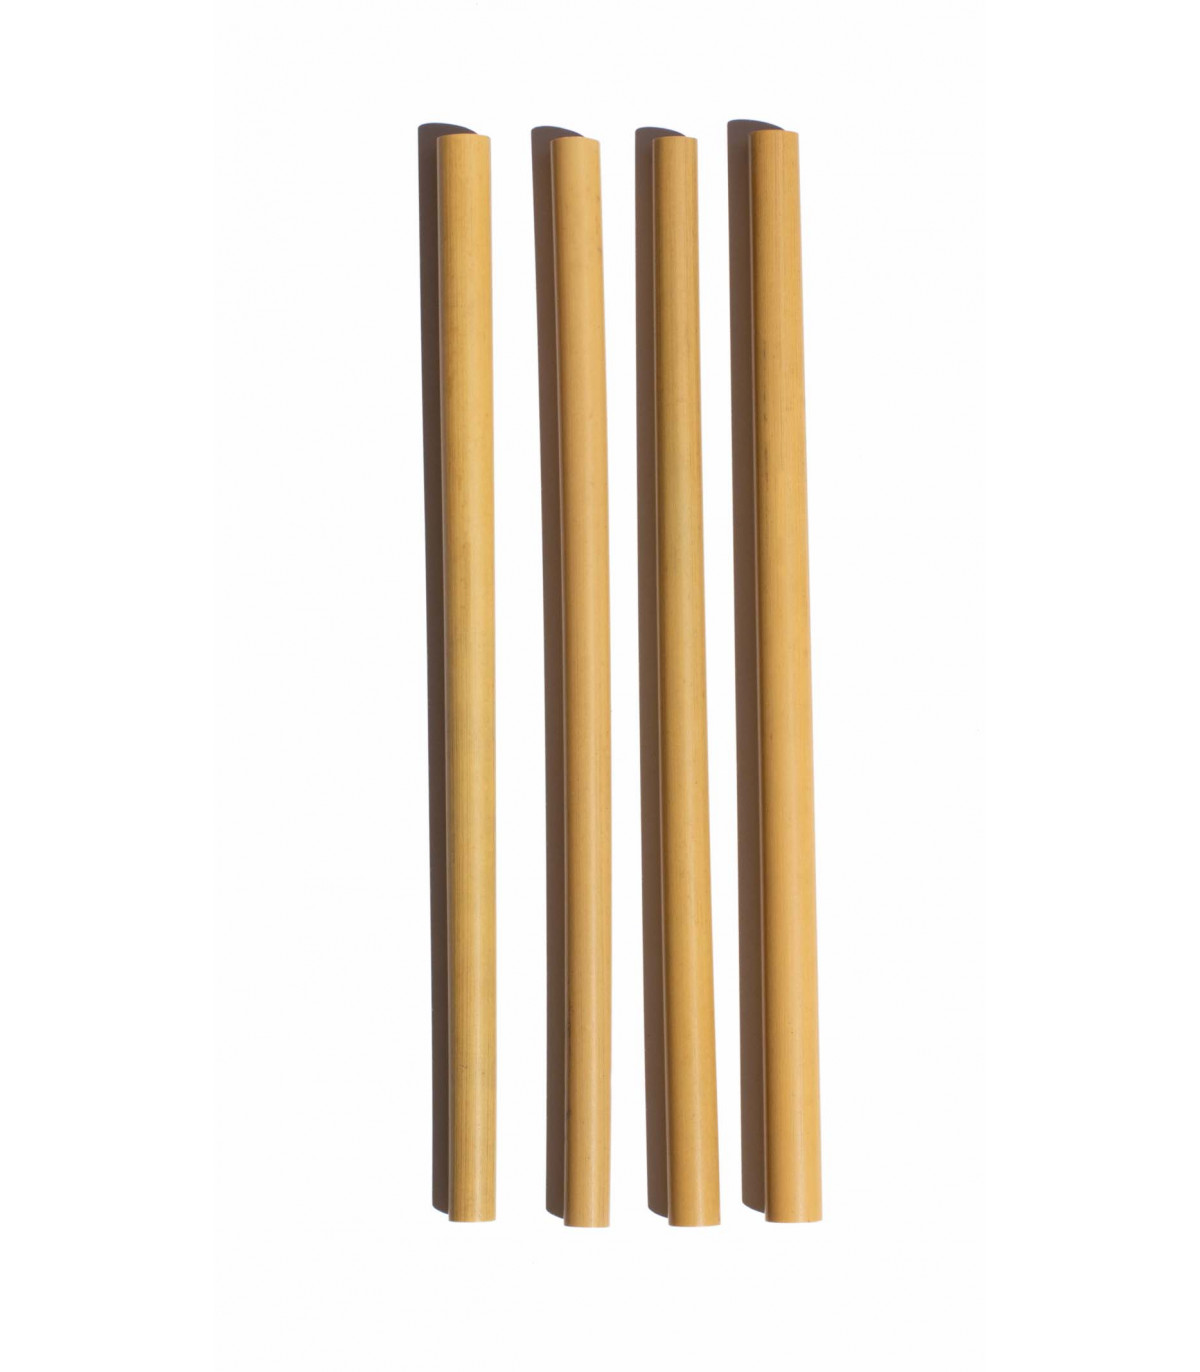 Set of 4 Reusable Bamboo Straws, Easy to clean